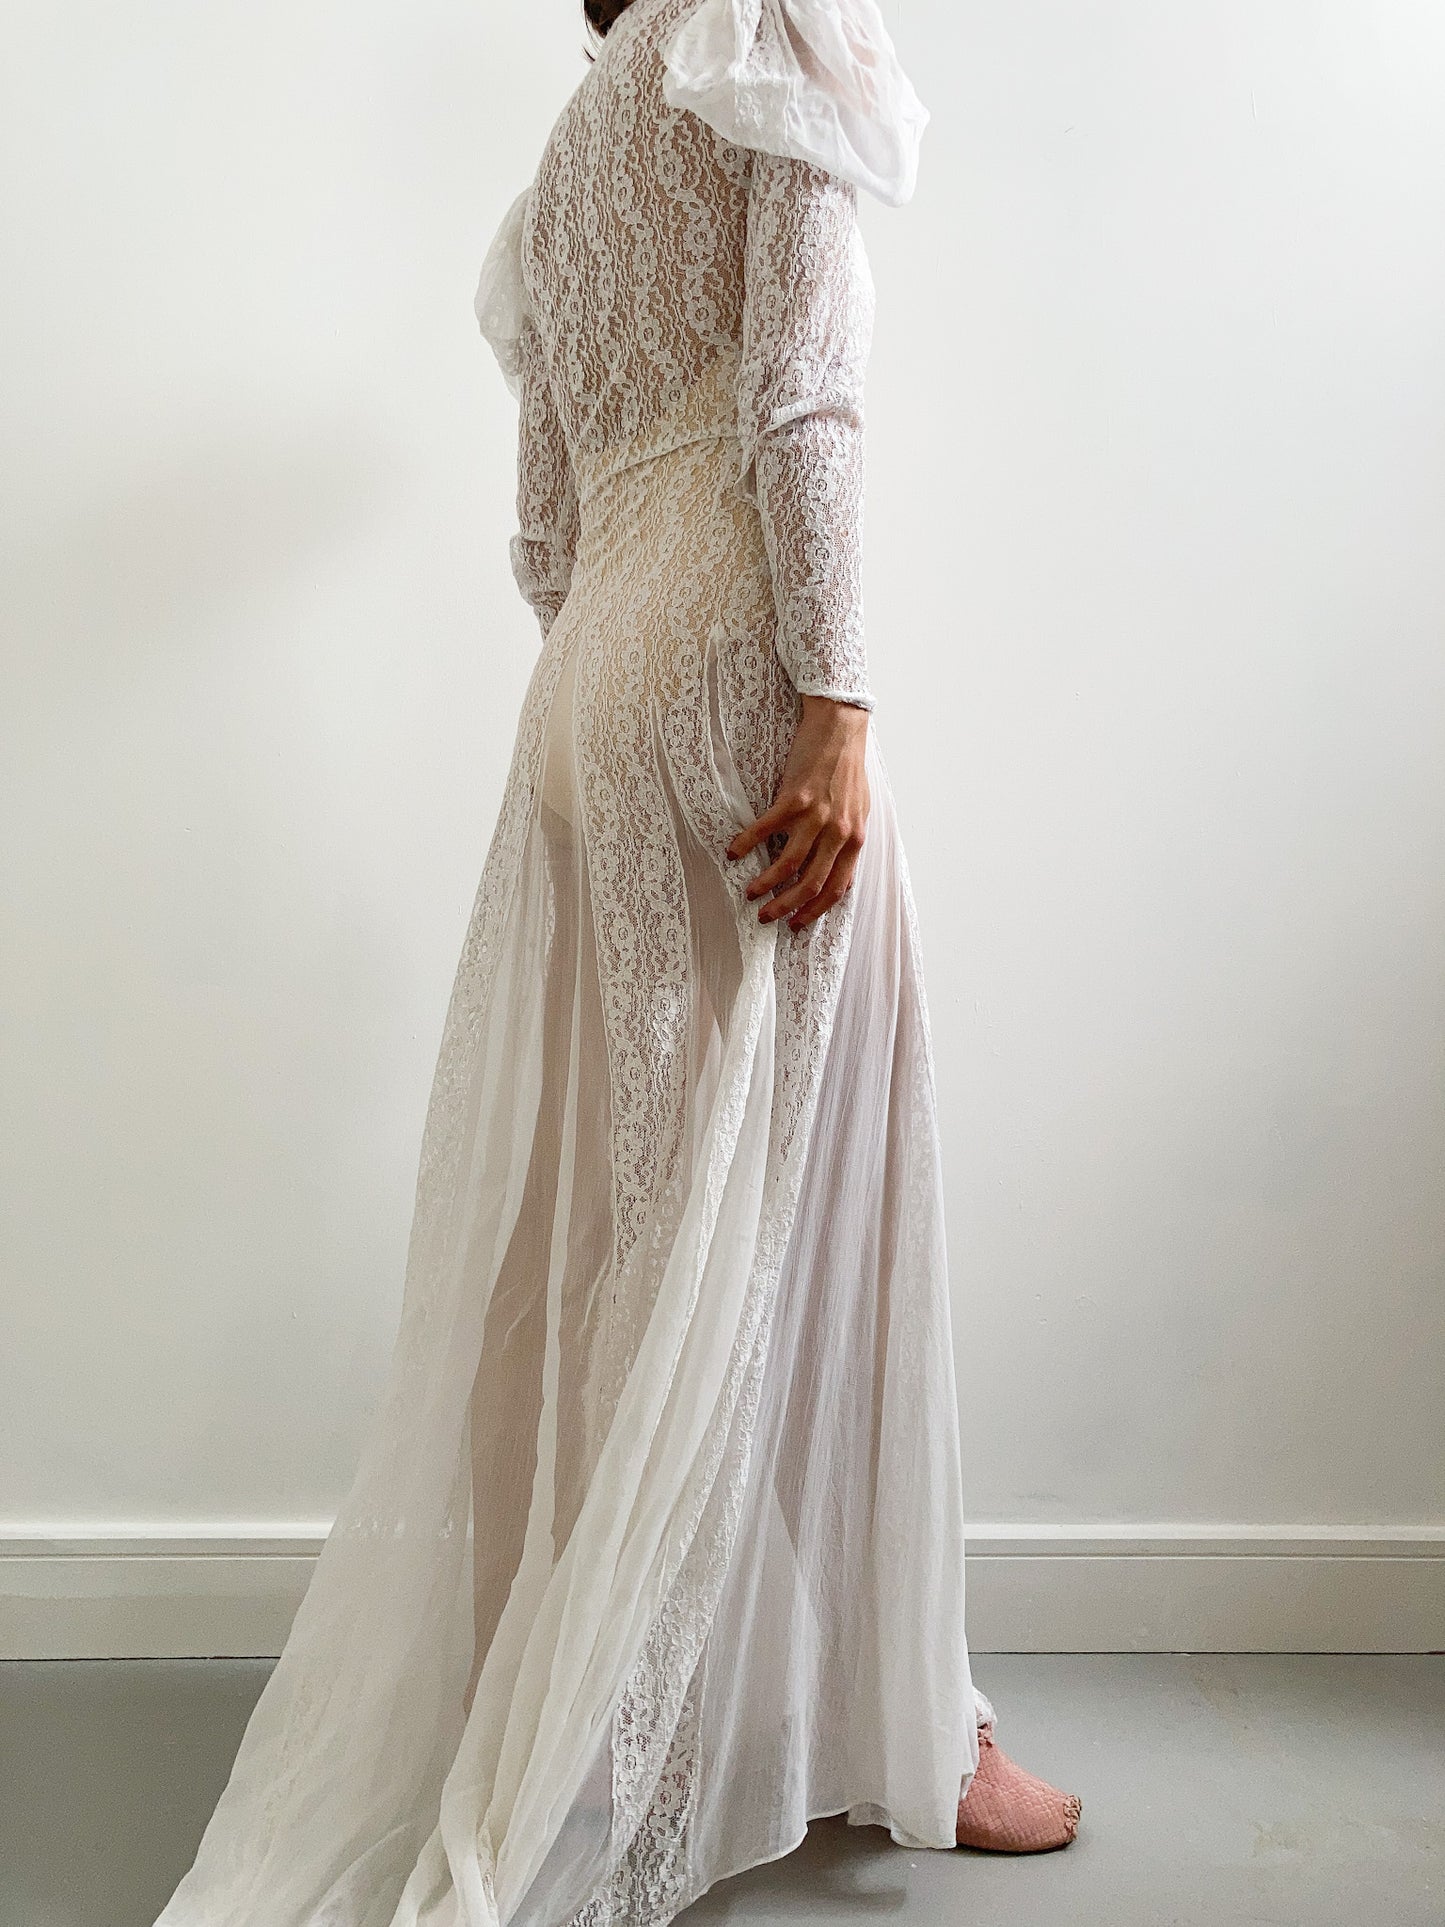 1930s Lace and Puff Sleeve Wedding Dress with Catherdal Train